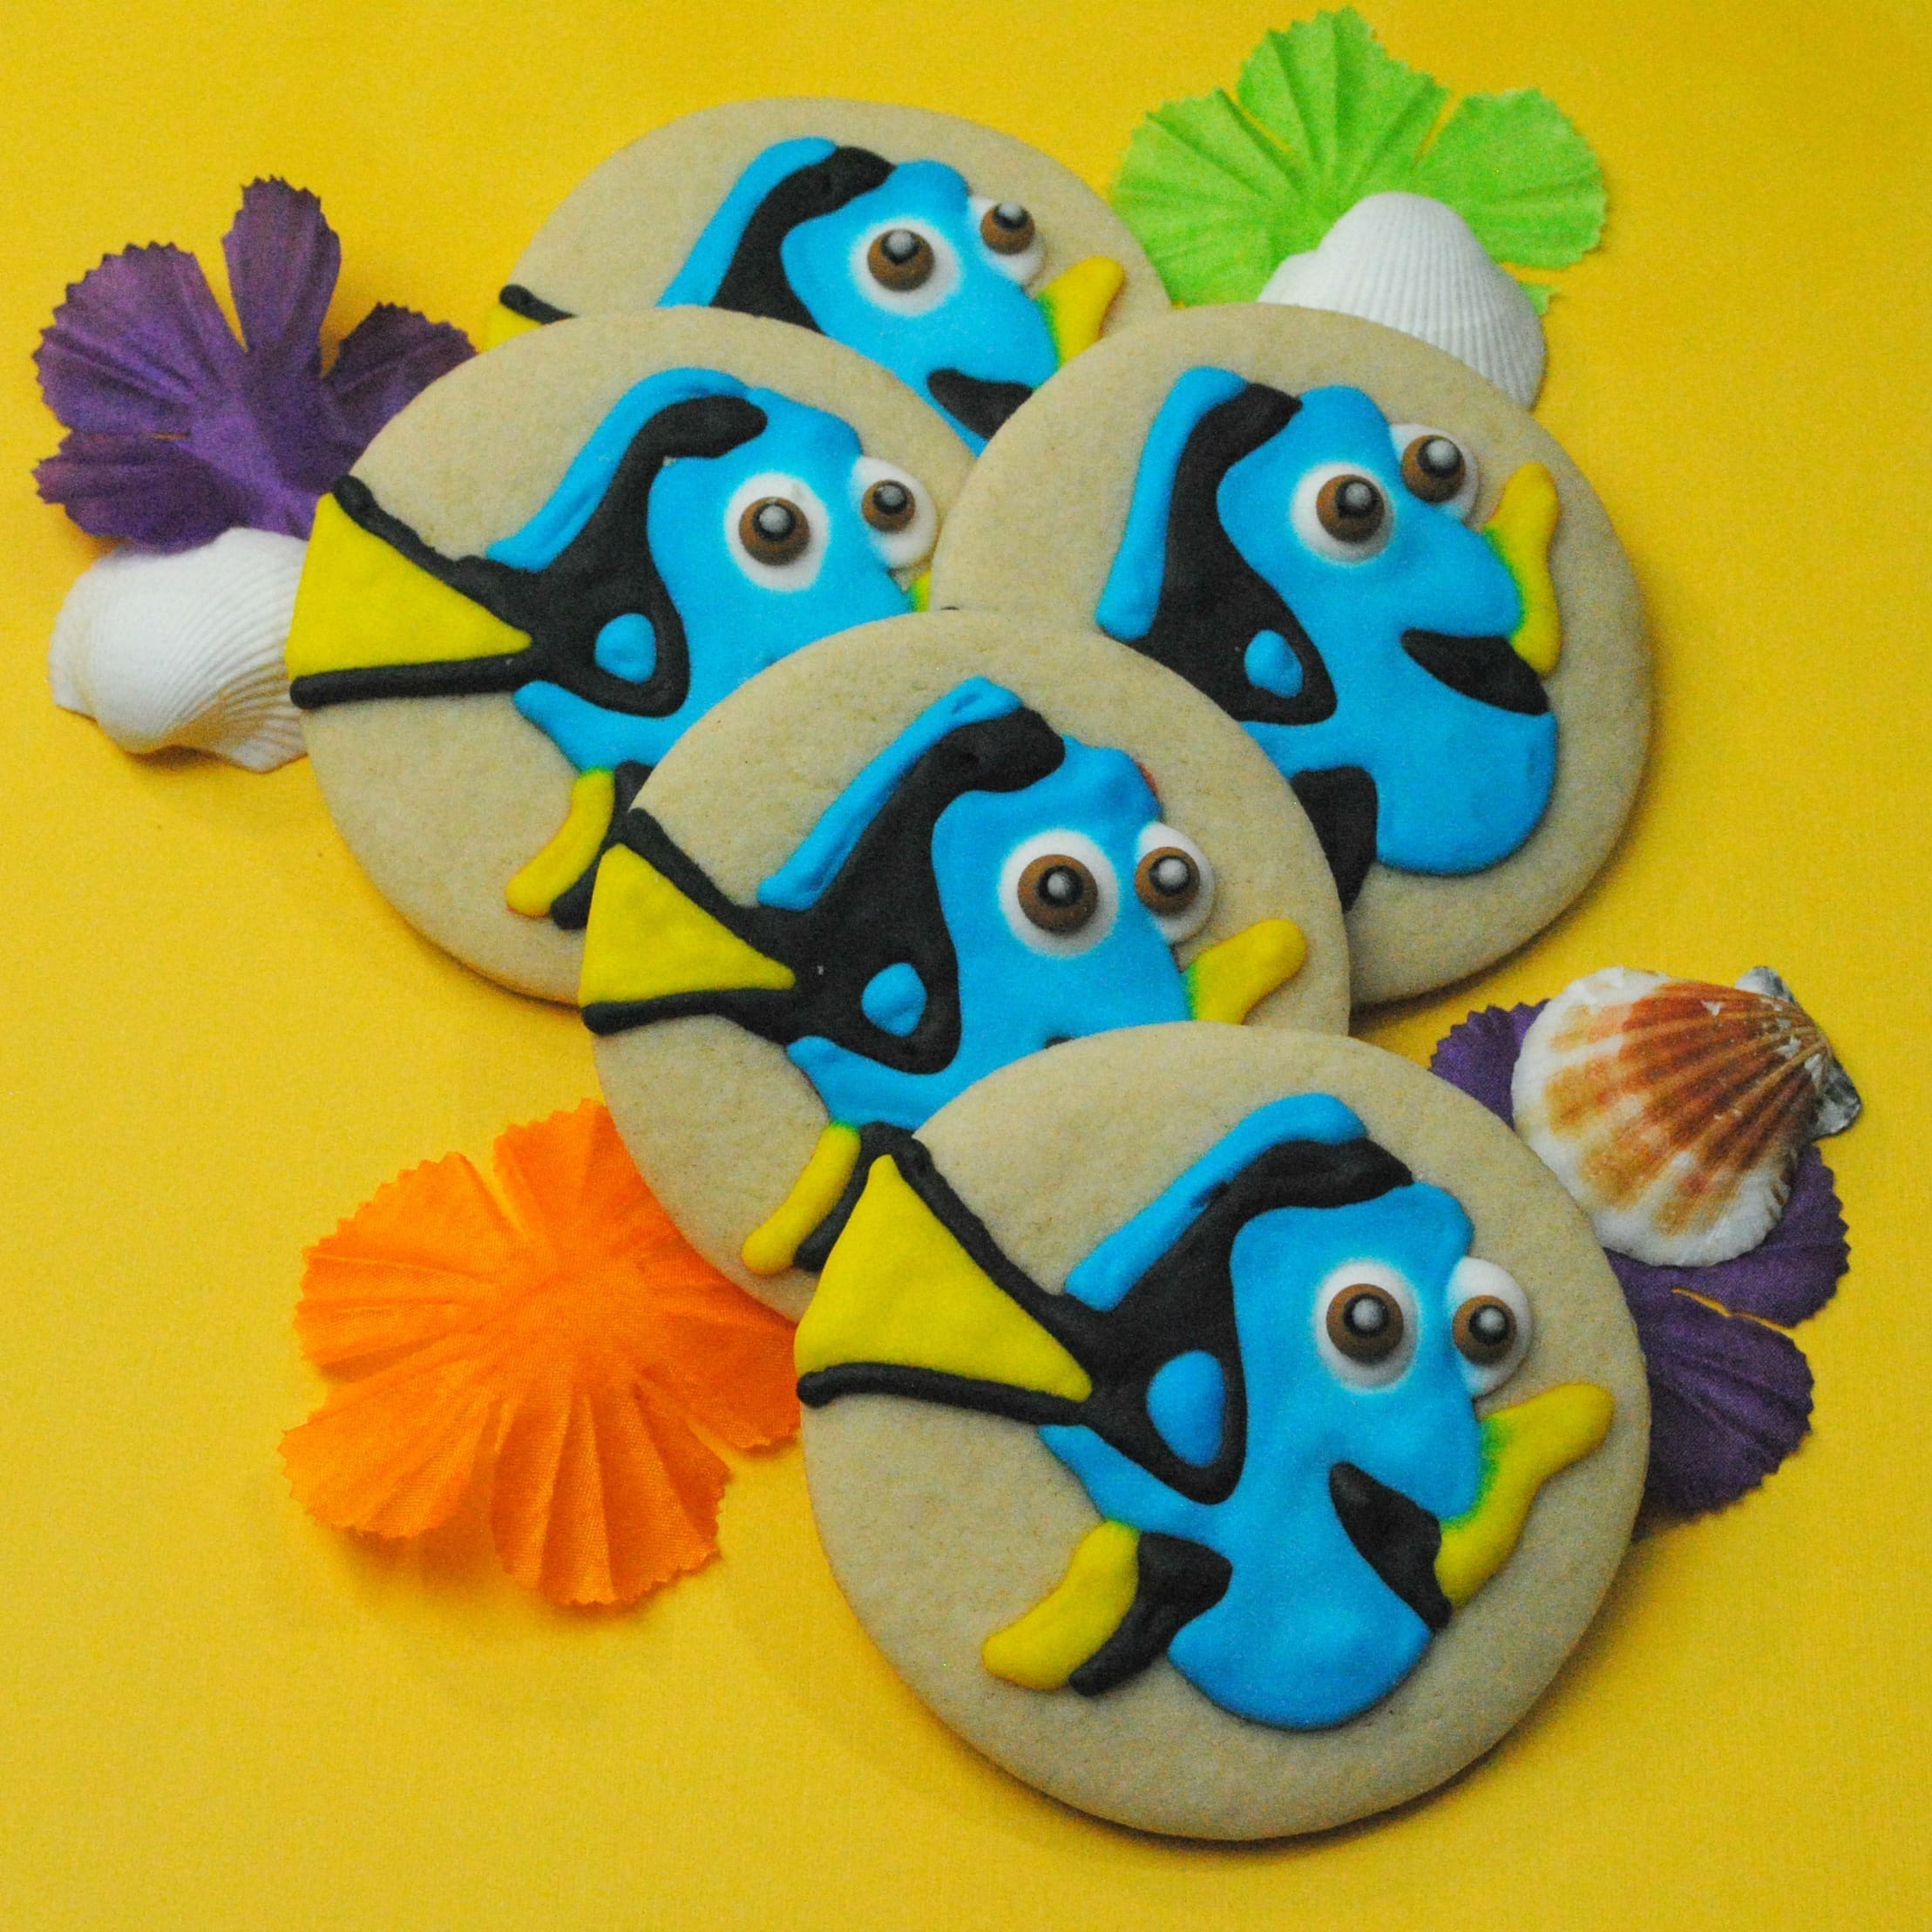 How To Make Finding Dory Cookies